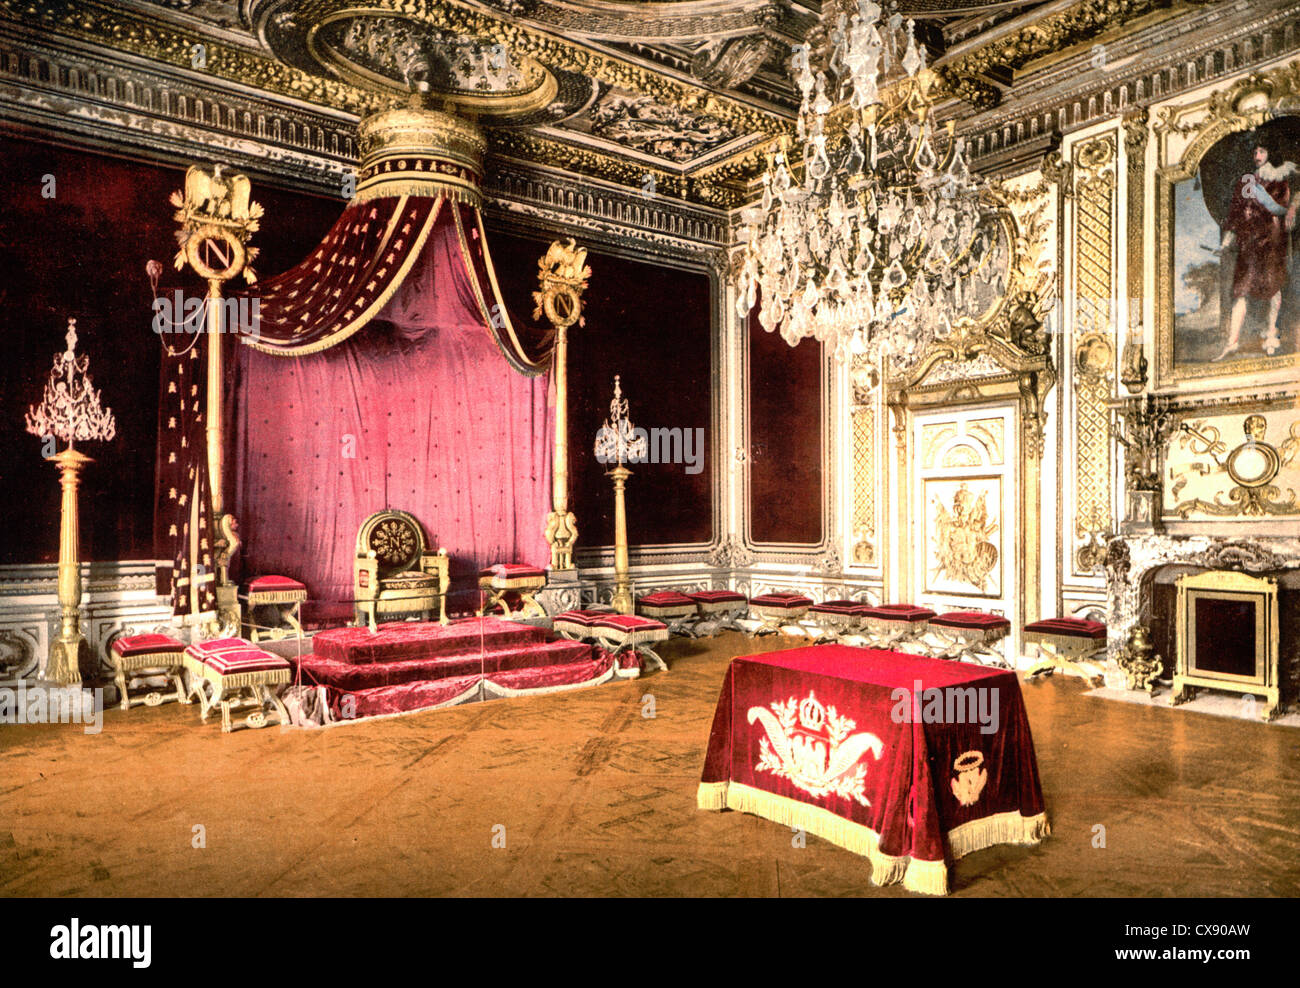 The throne room, Fontainebleau Palace, France, circa 1900 Stock Photo